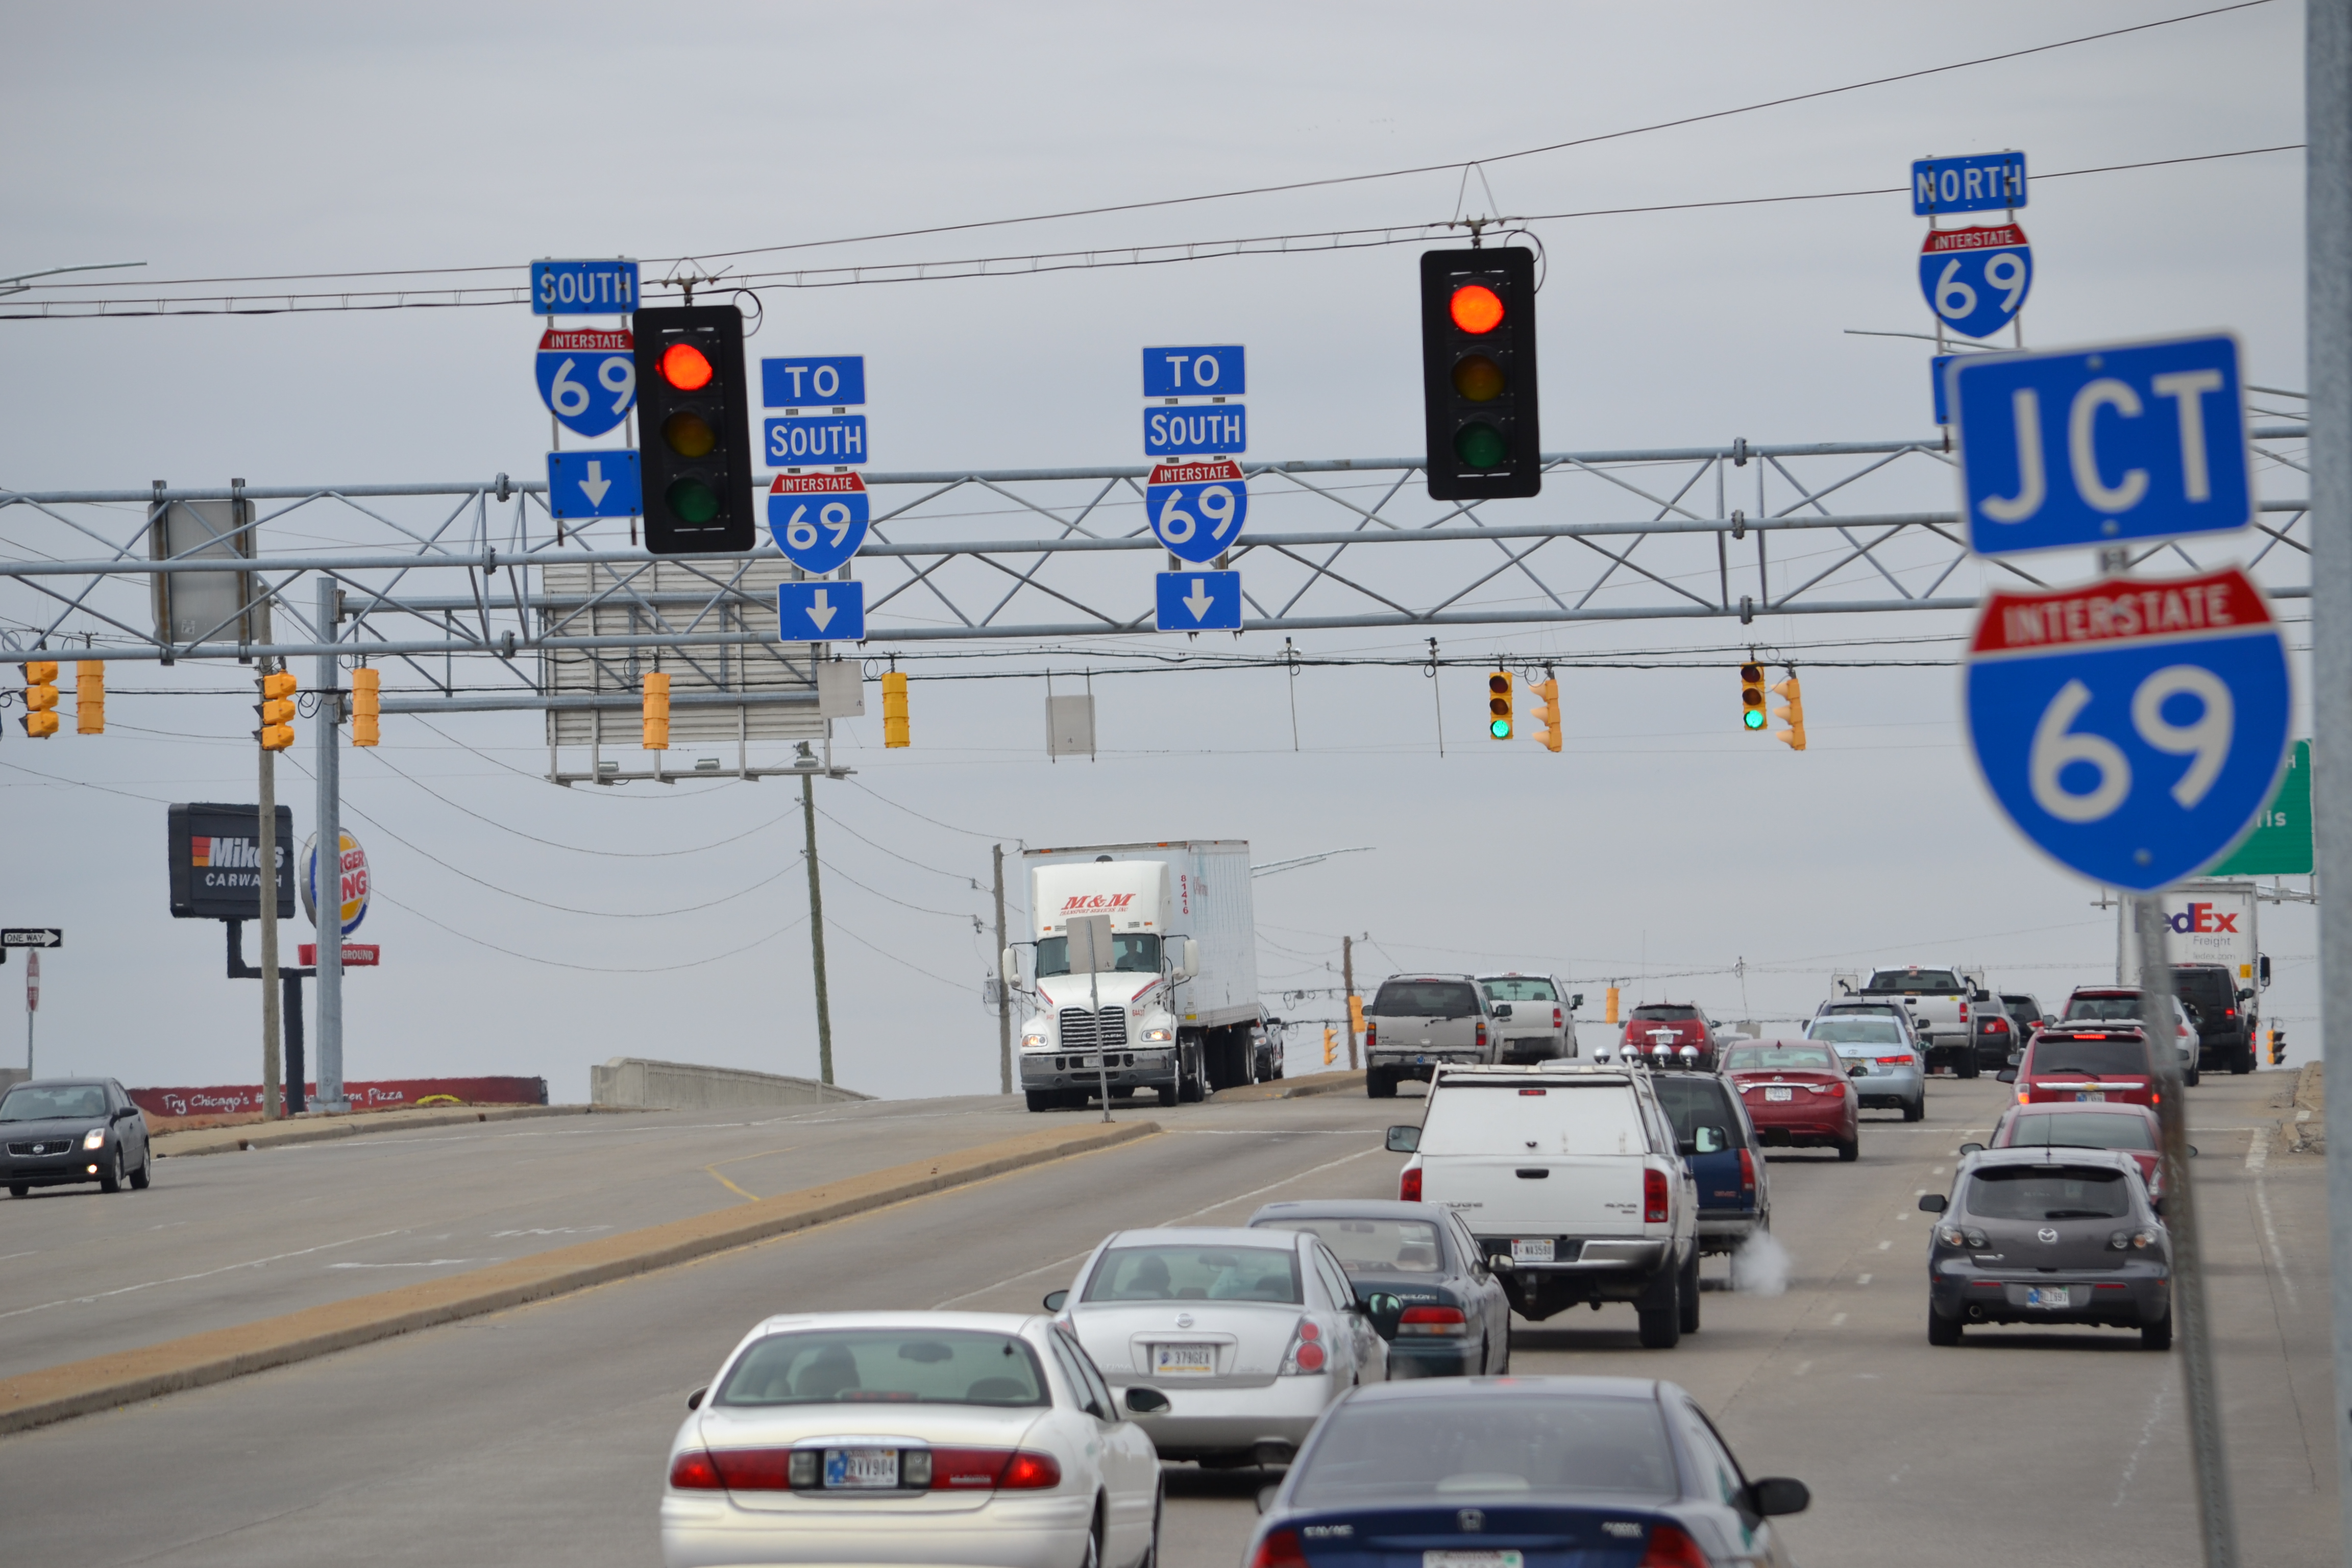 Traffic lights on 96th at I-69 that are part of a DriveFishers project (Photo by John Cinnamon)